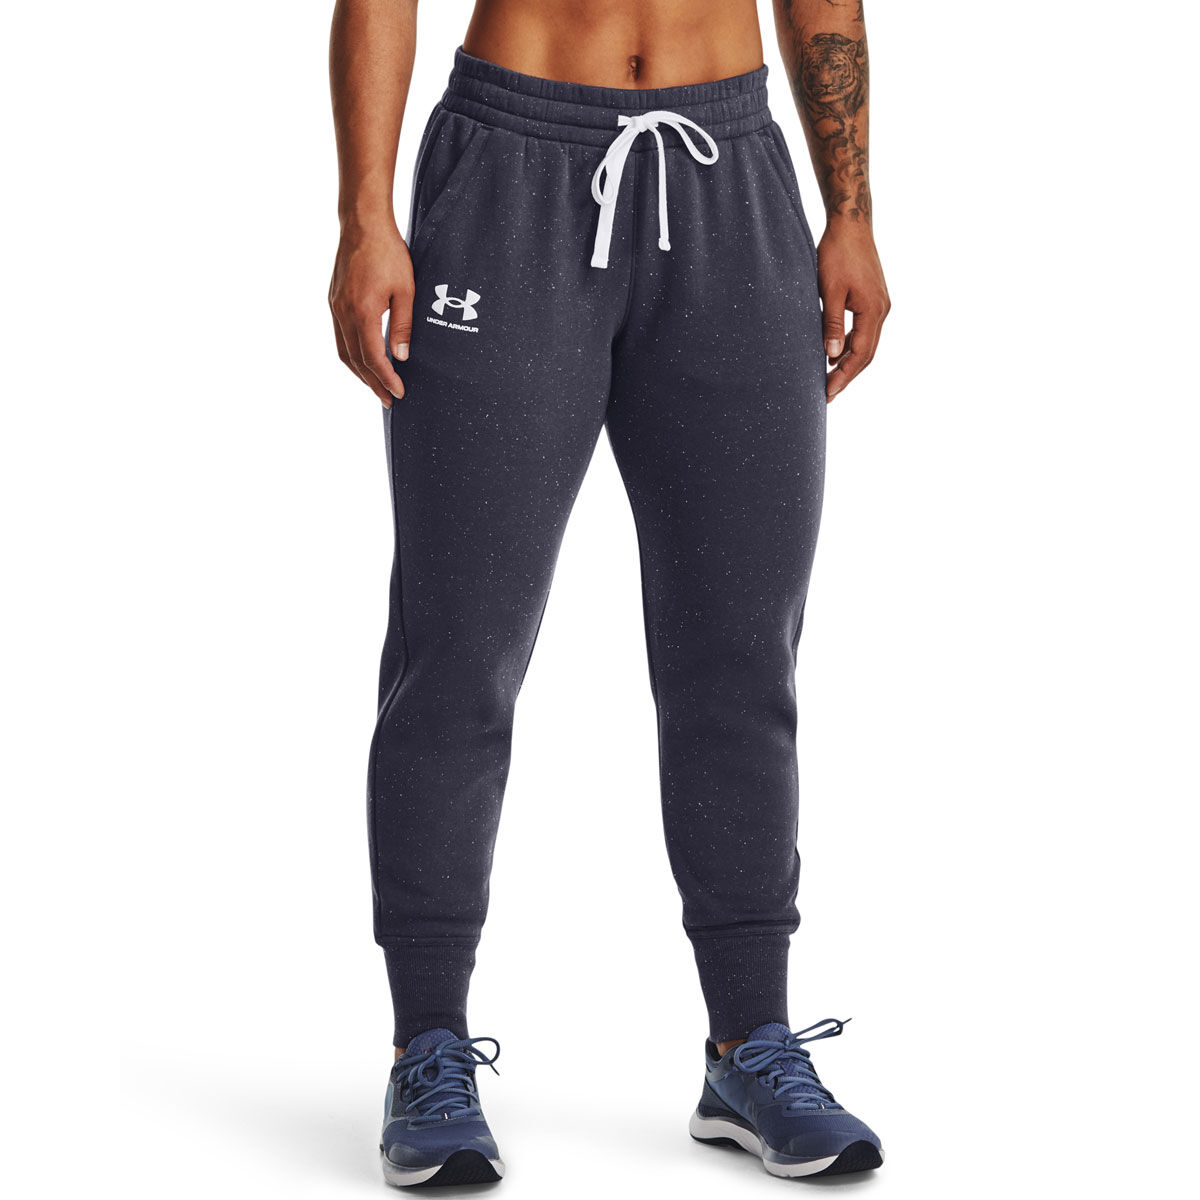 Under Armour Women's Rival Fleece Graphic Joggers , Black (001)/White ,  Small